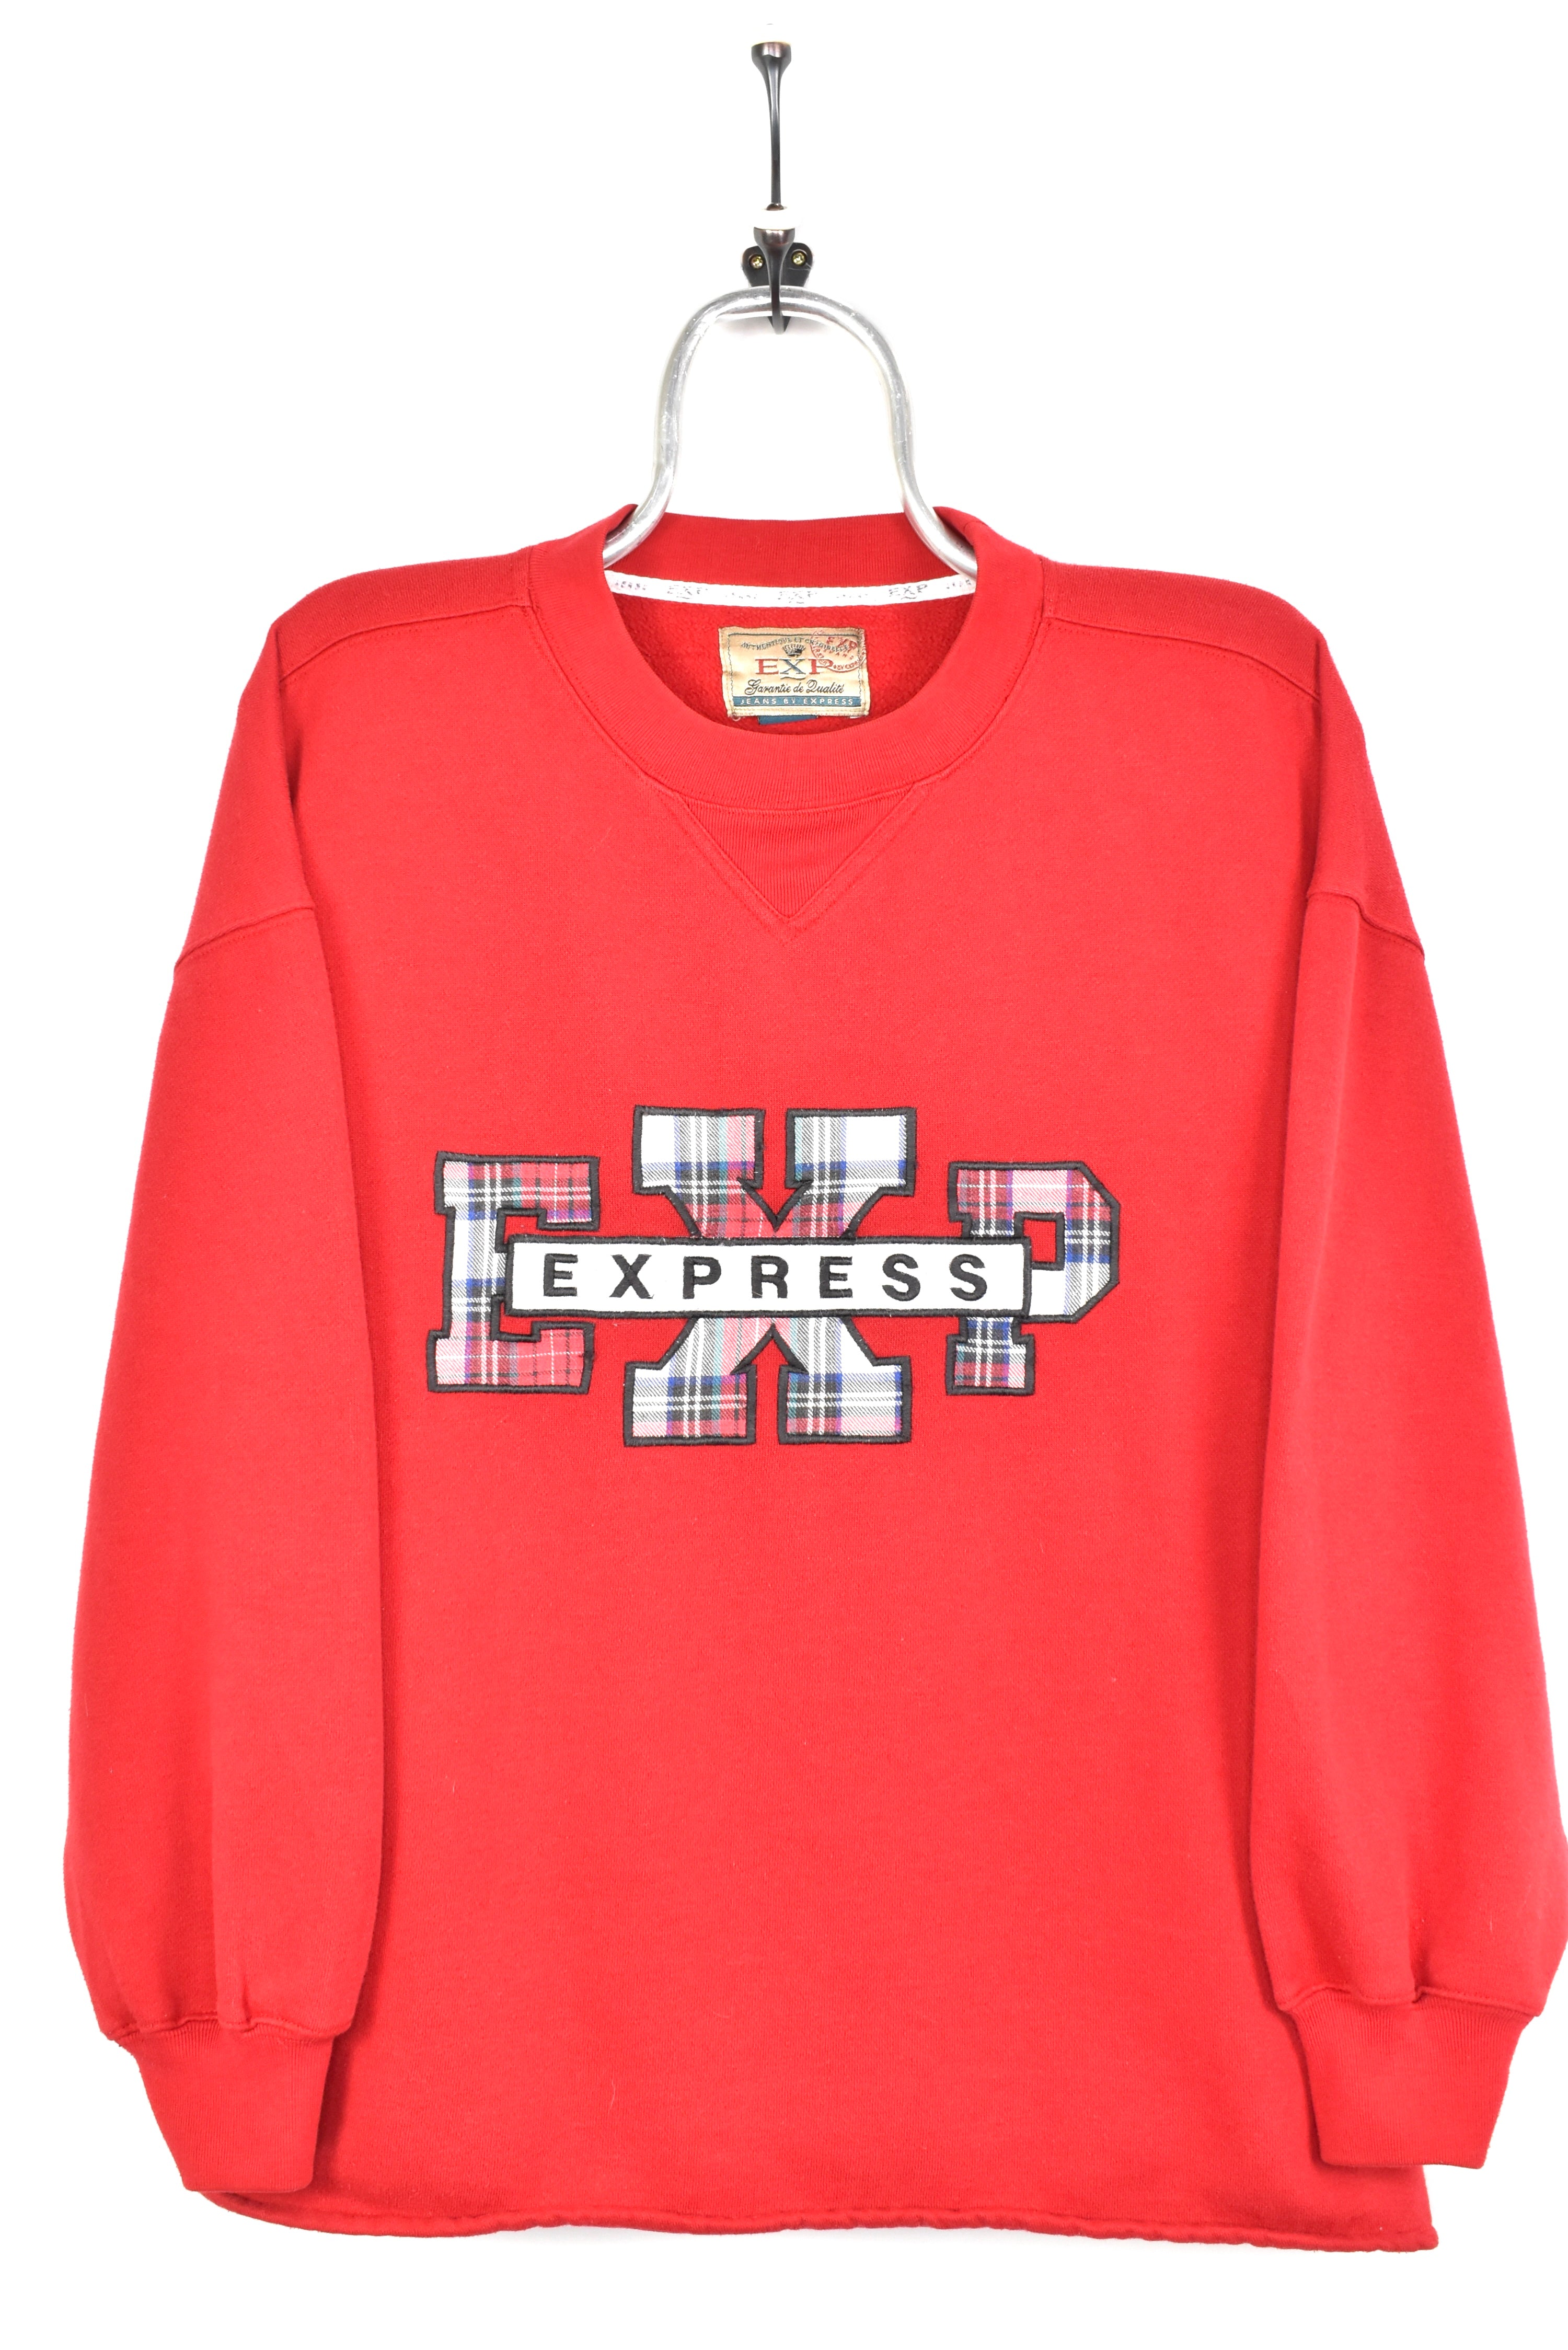 VINTAGE EXPRESS EMBROIDERED RED SWEATSHIRT | XL OTHER